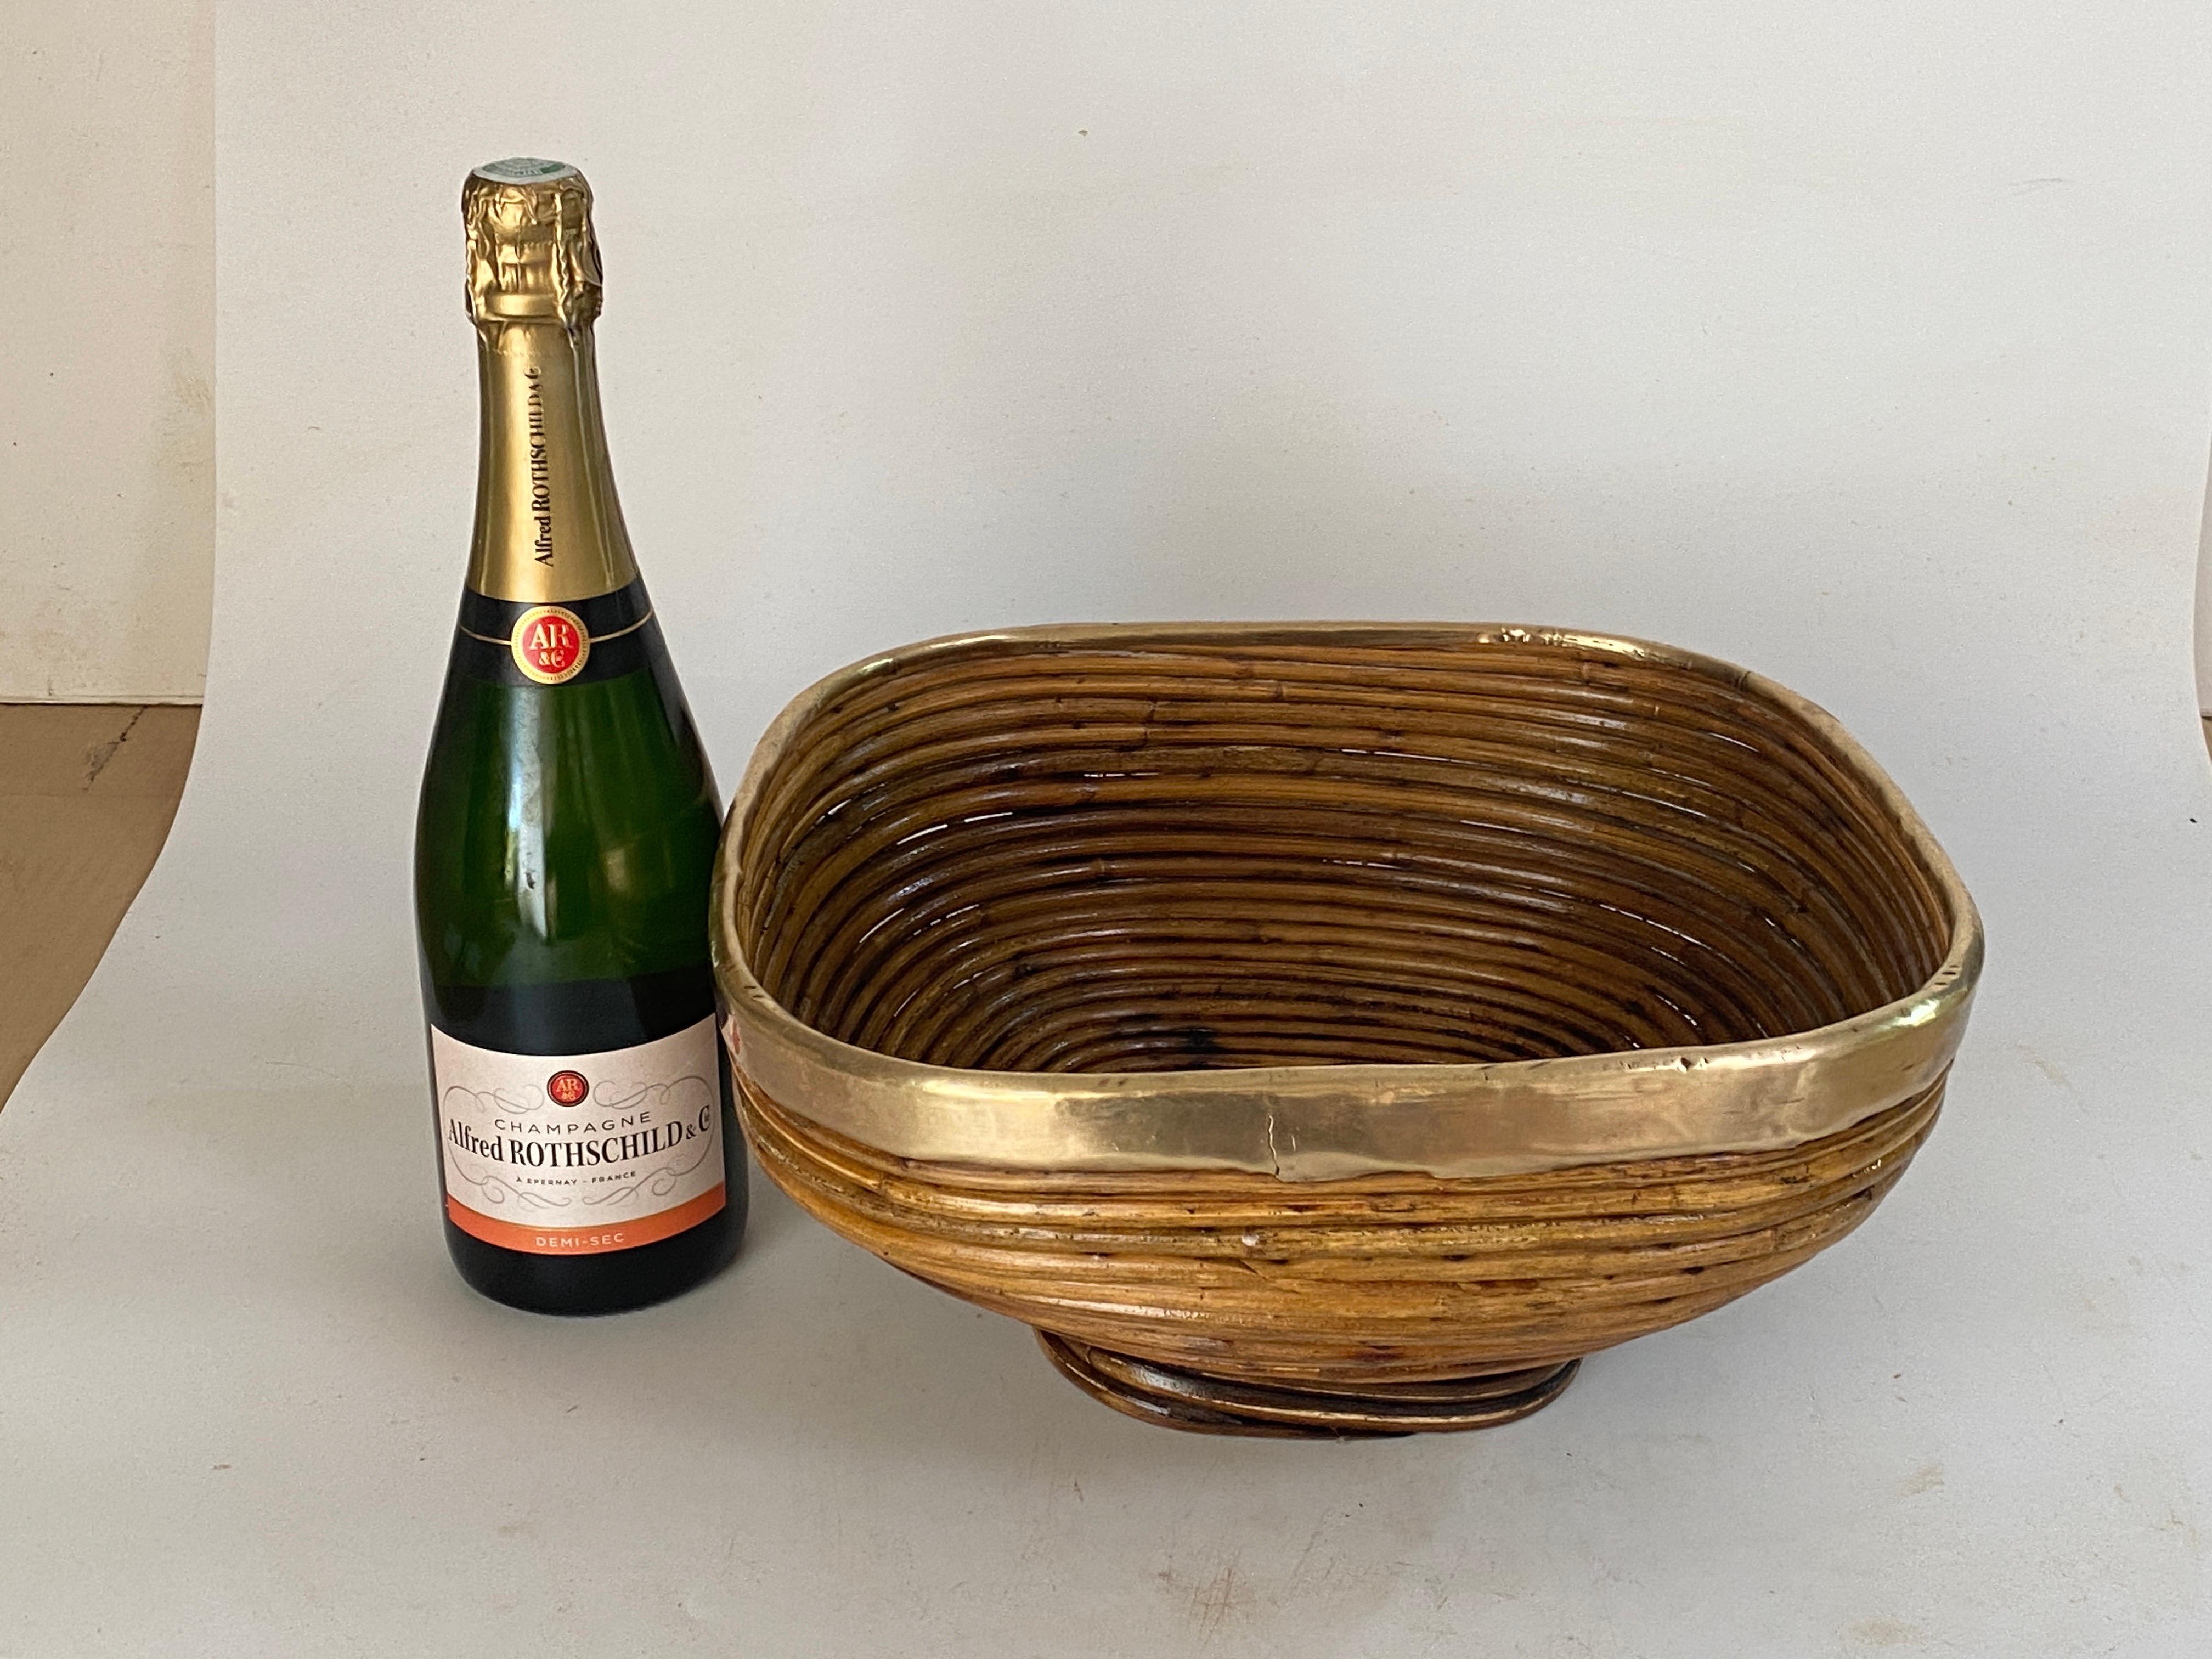 Mid-Century Modern brass and bamboo / rattan largebowl, centerpiece or basket.
It has a brass trim covering the top.
Handcrafted in Italy, 1970s. 
Use it as fruit bowl or centerpiece to add a stylish Midcentury accent in a kitchen. Perfect to